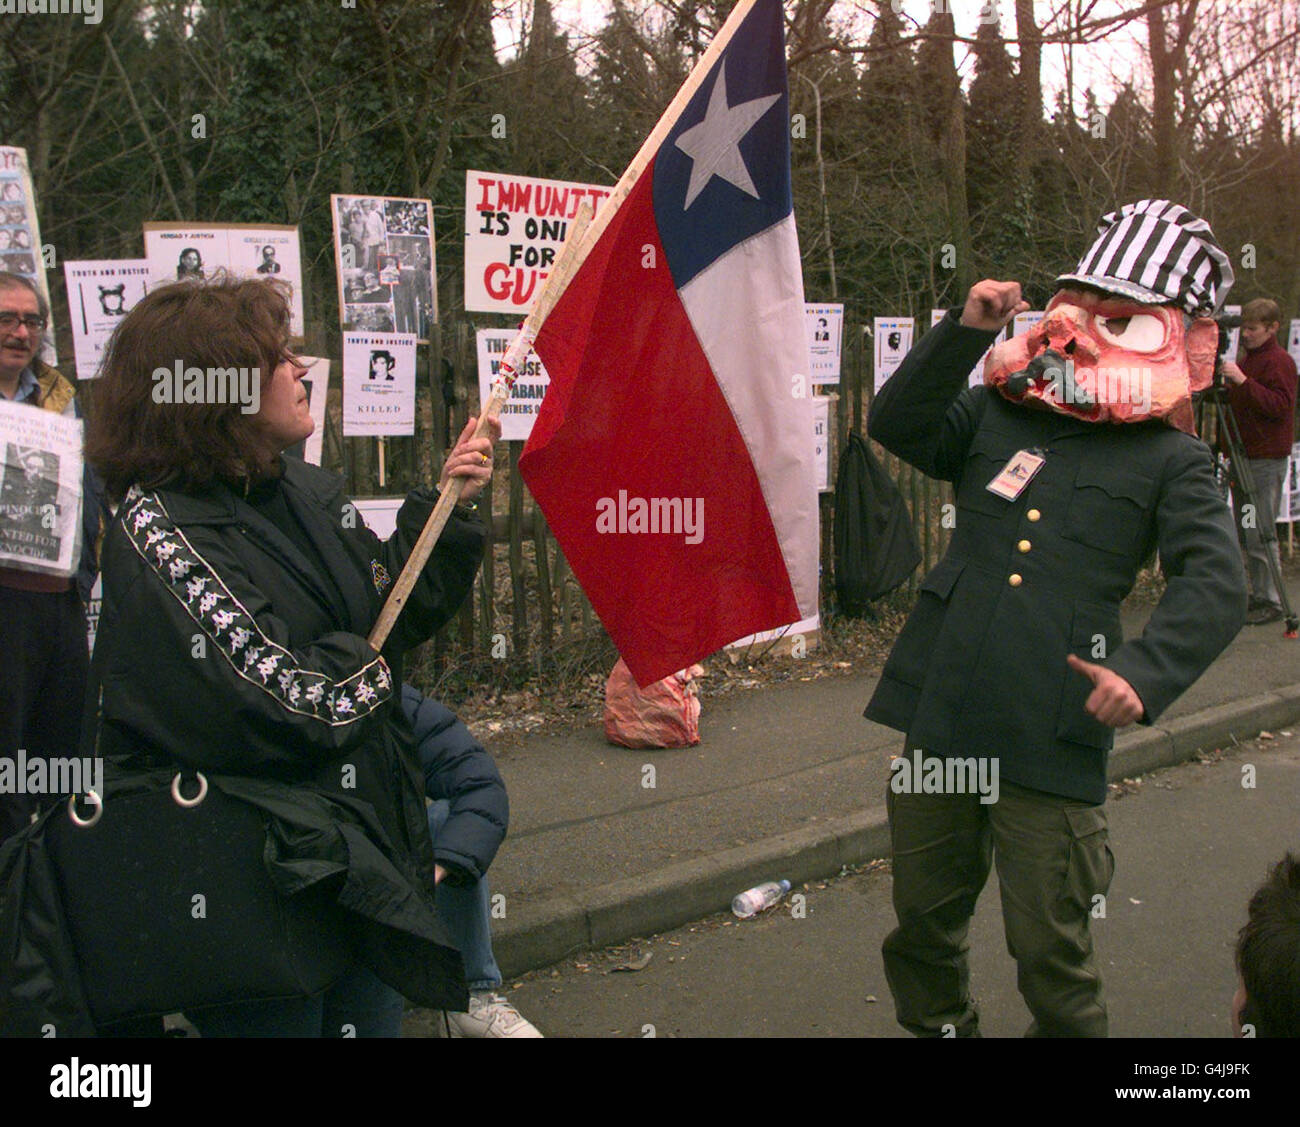 Anti Pinochet protesters outside the house in Wentworth, where former Chilean dictator General Augusto Pinochet is under house arrest, on the day that the House of Lords will rule whether Pinochet will be extradited to Spain to face trial for crimes against humanity. Stock Photo